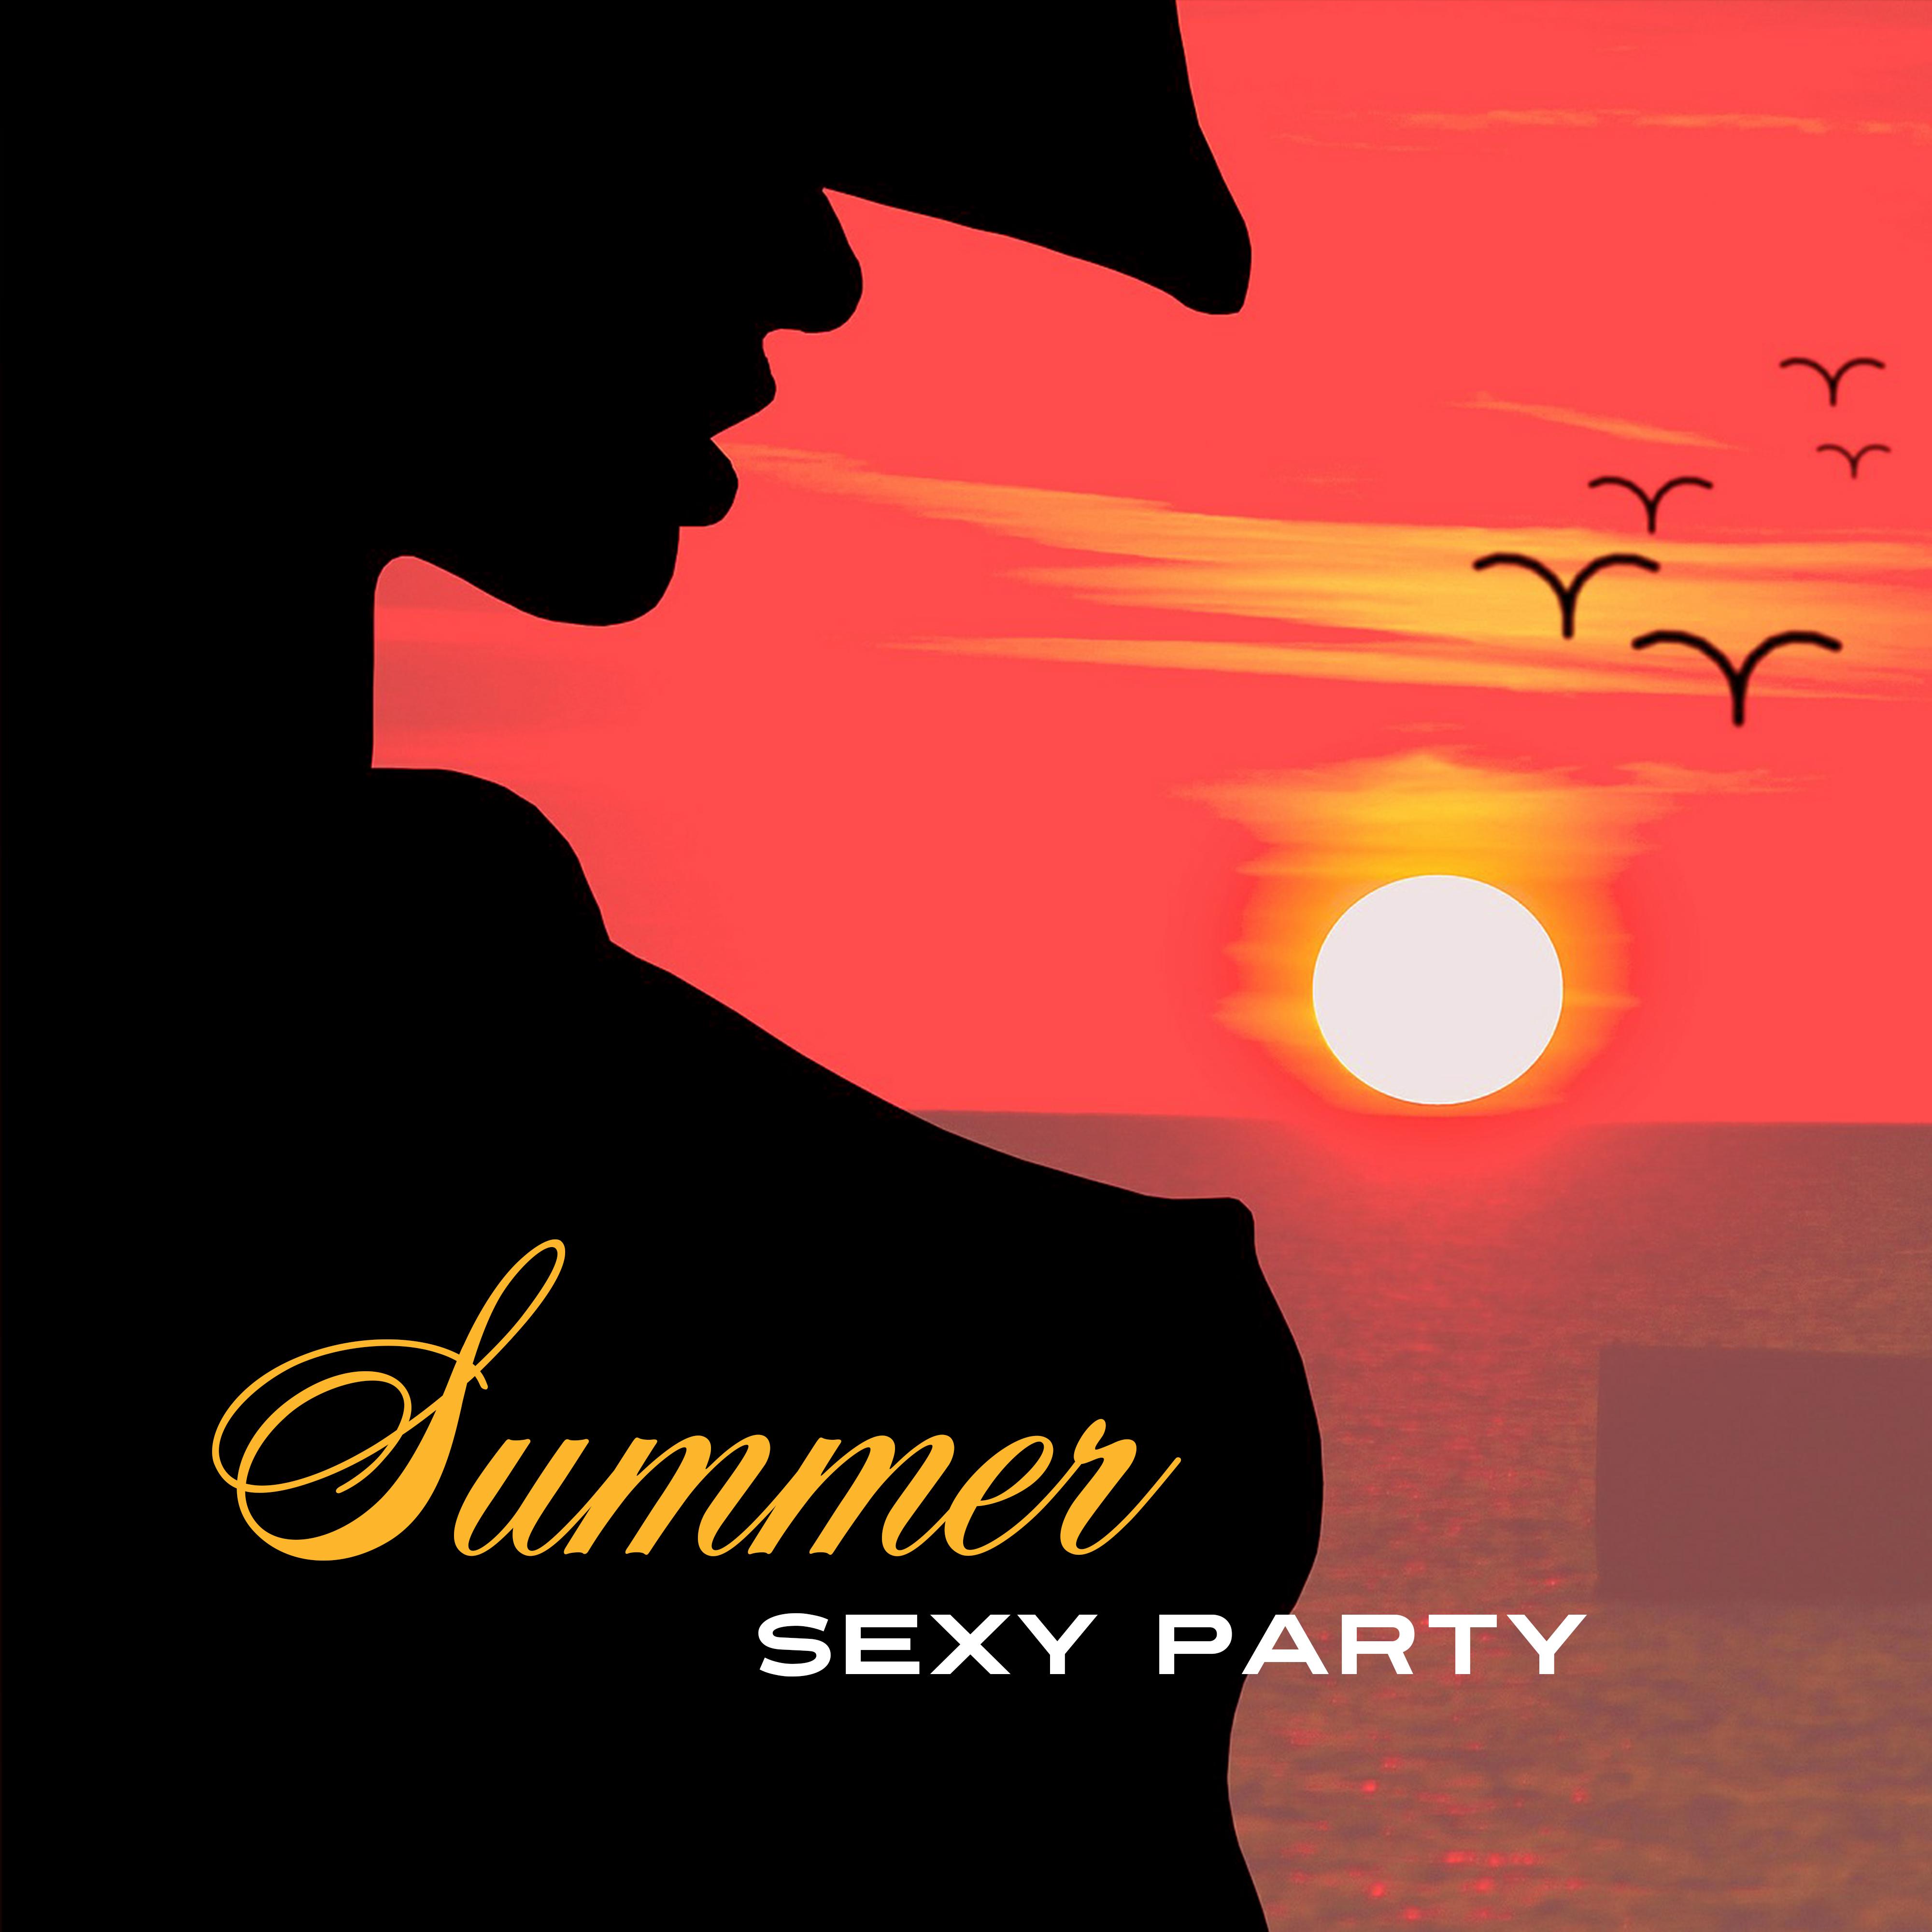 Summer **** Party – Ibiza Party Time, Beach Vibes, Hot Holiday Music, Stress Relief